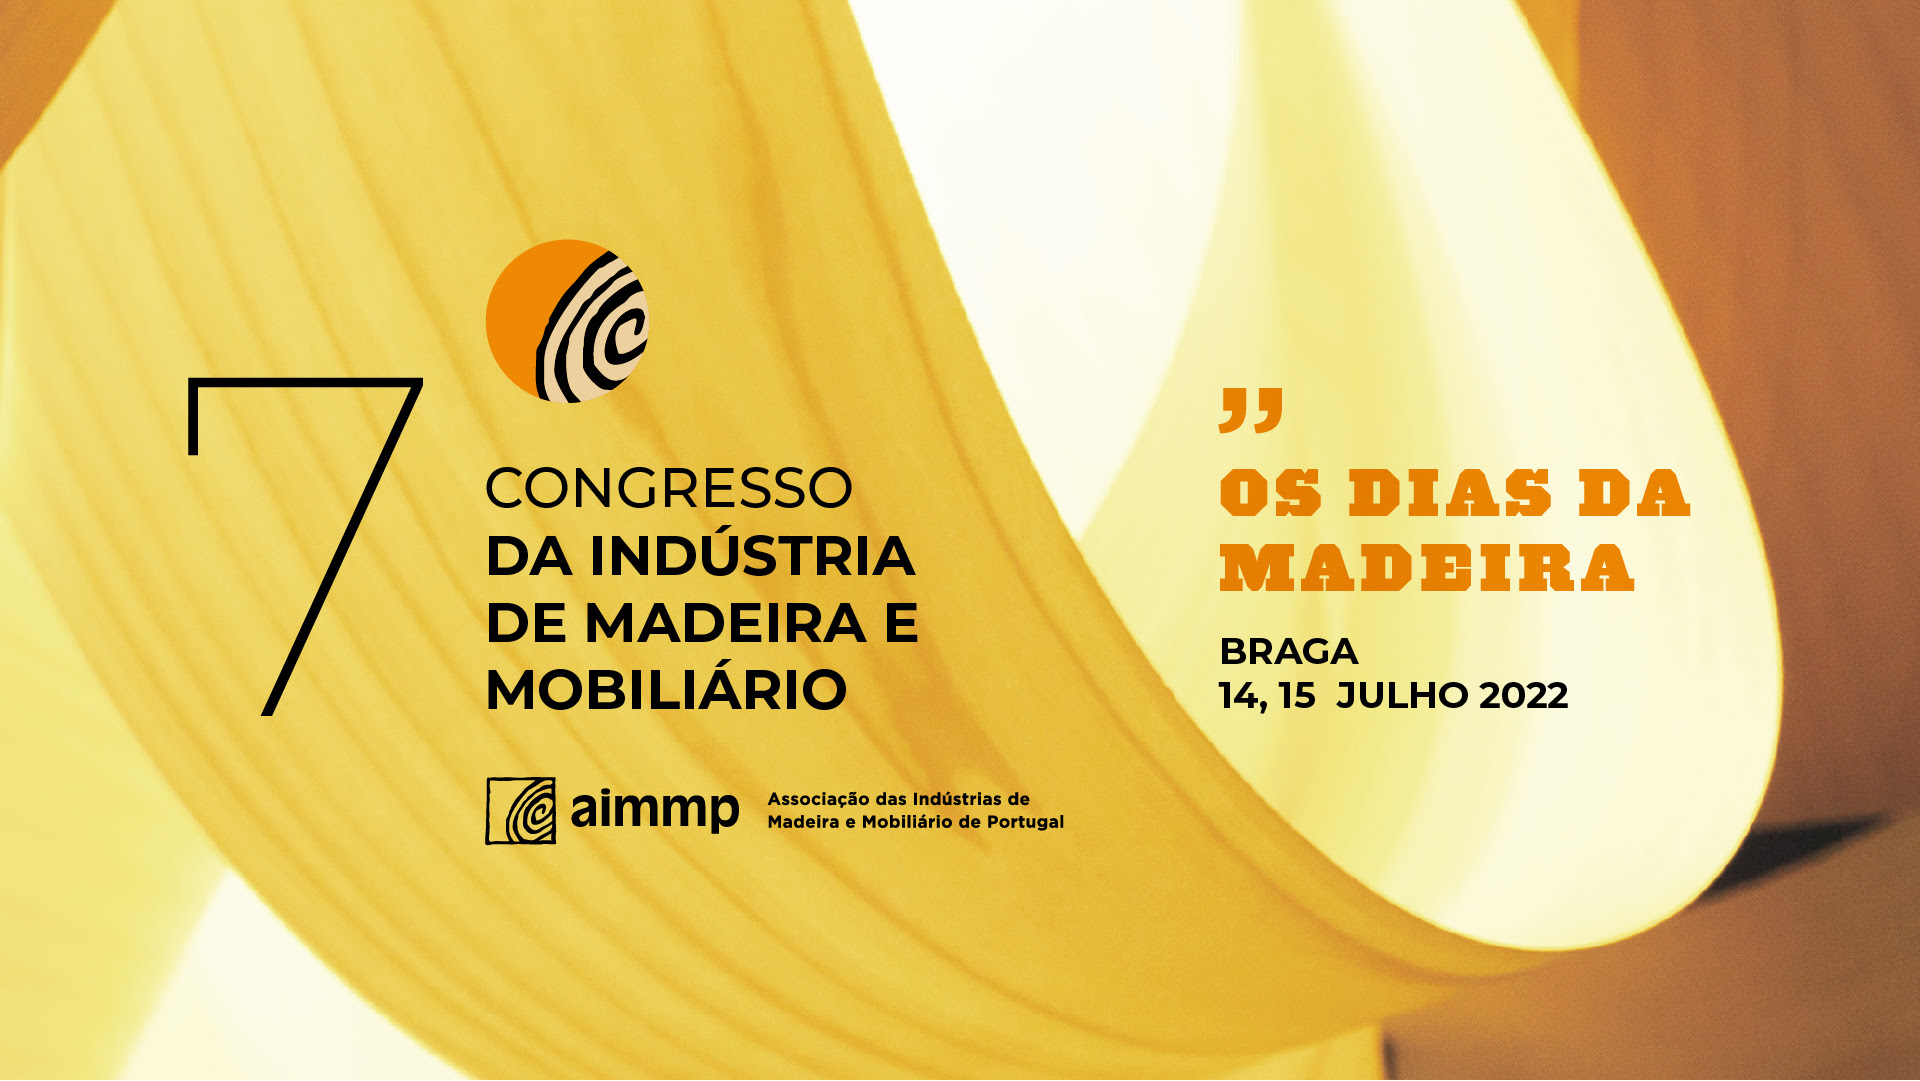 7th Congress of the Wood and Furniture Industry July 14th and 15th, in Braga